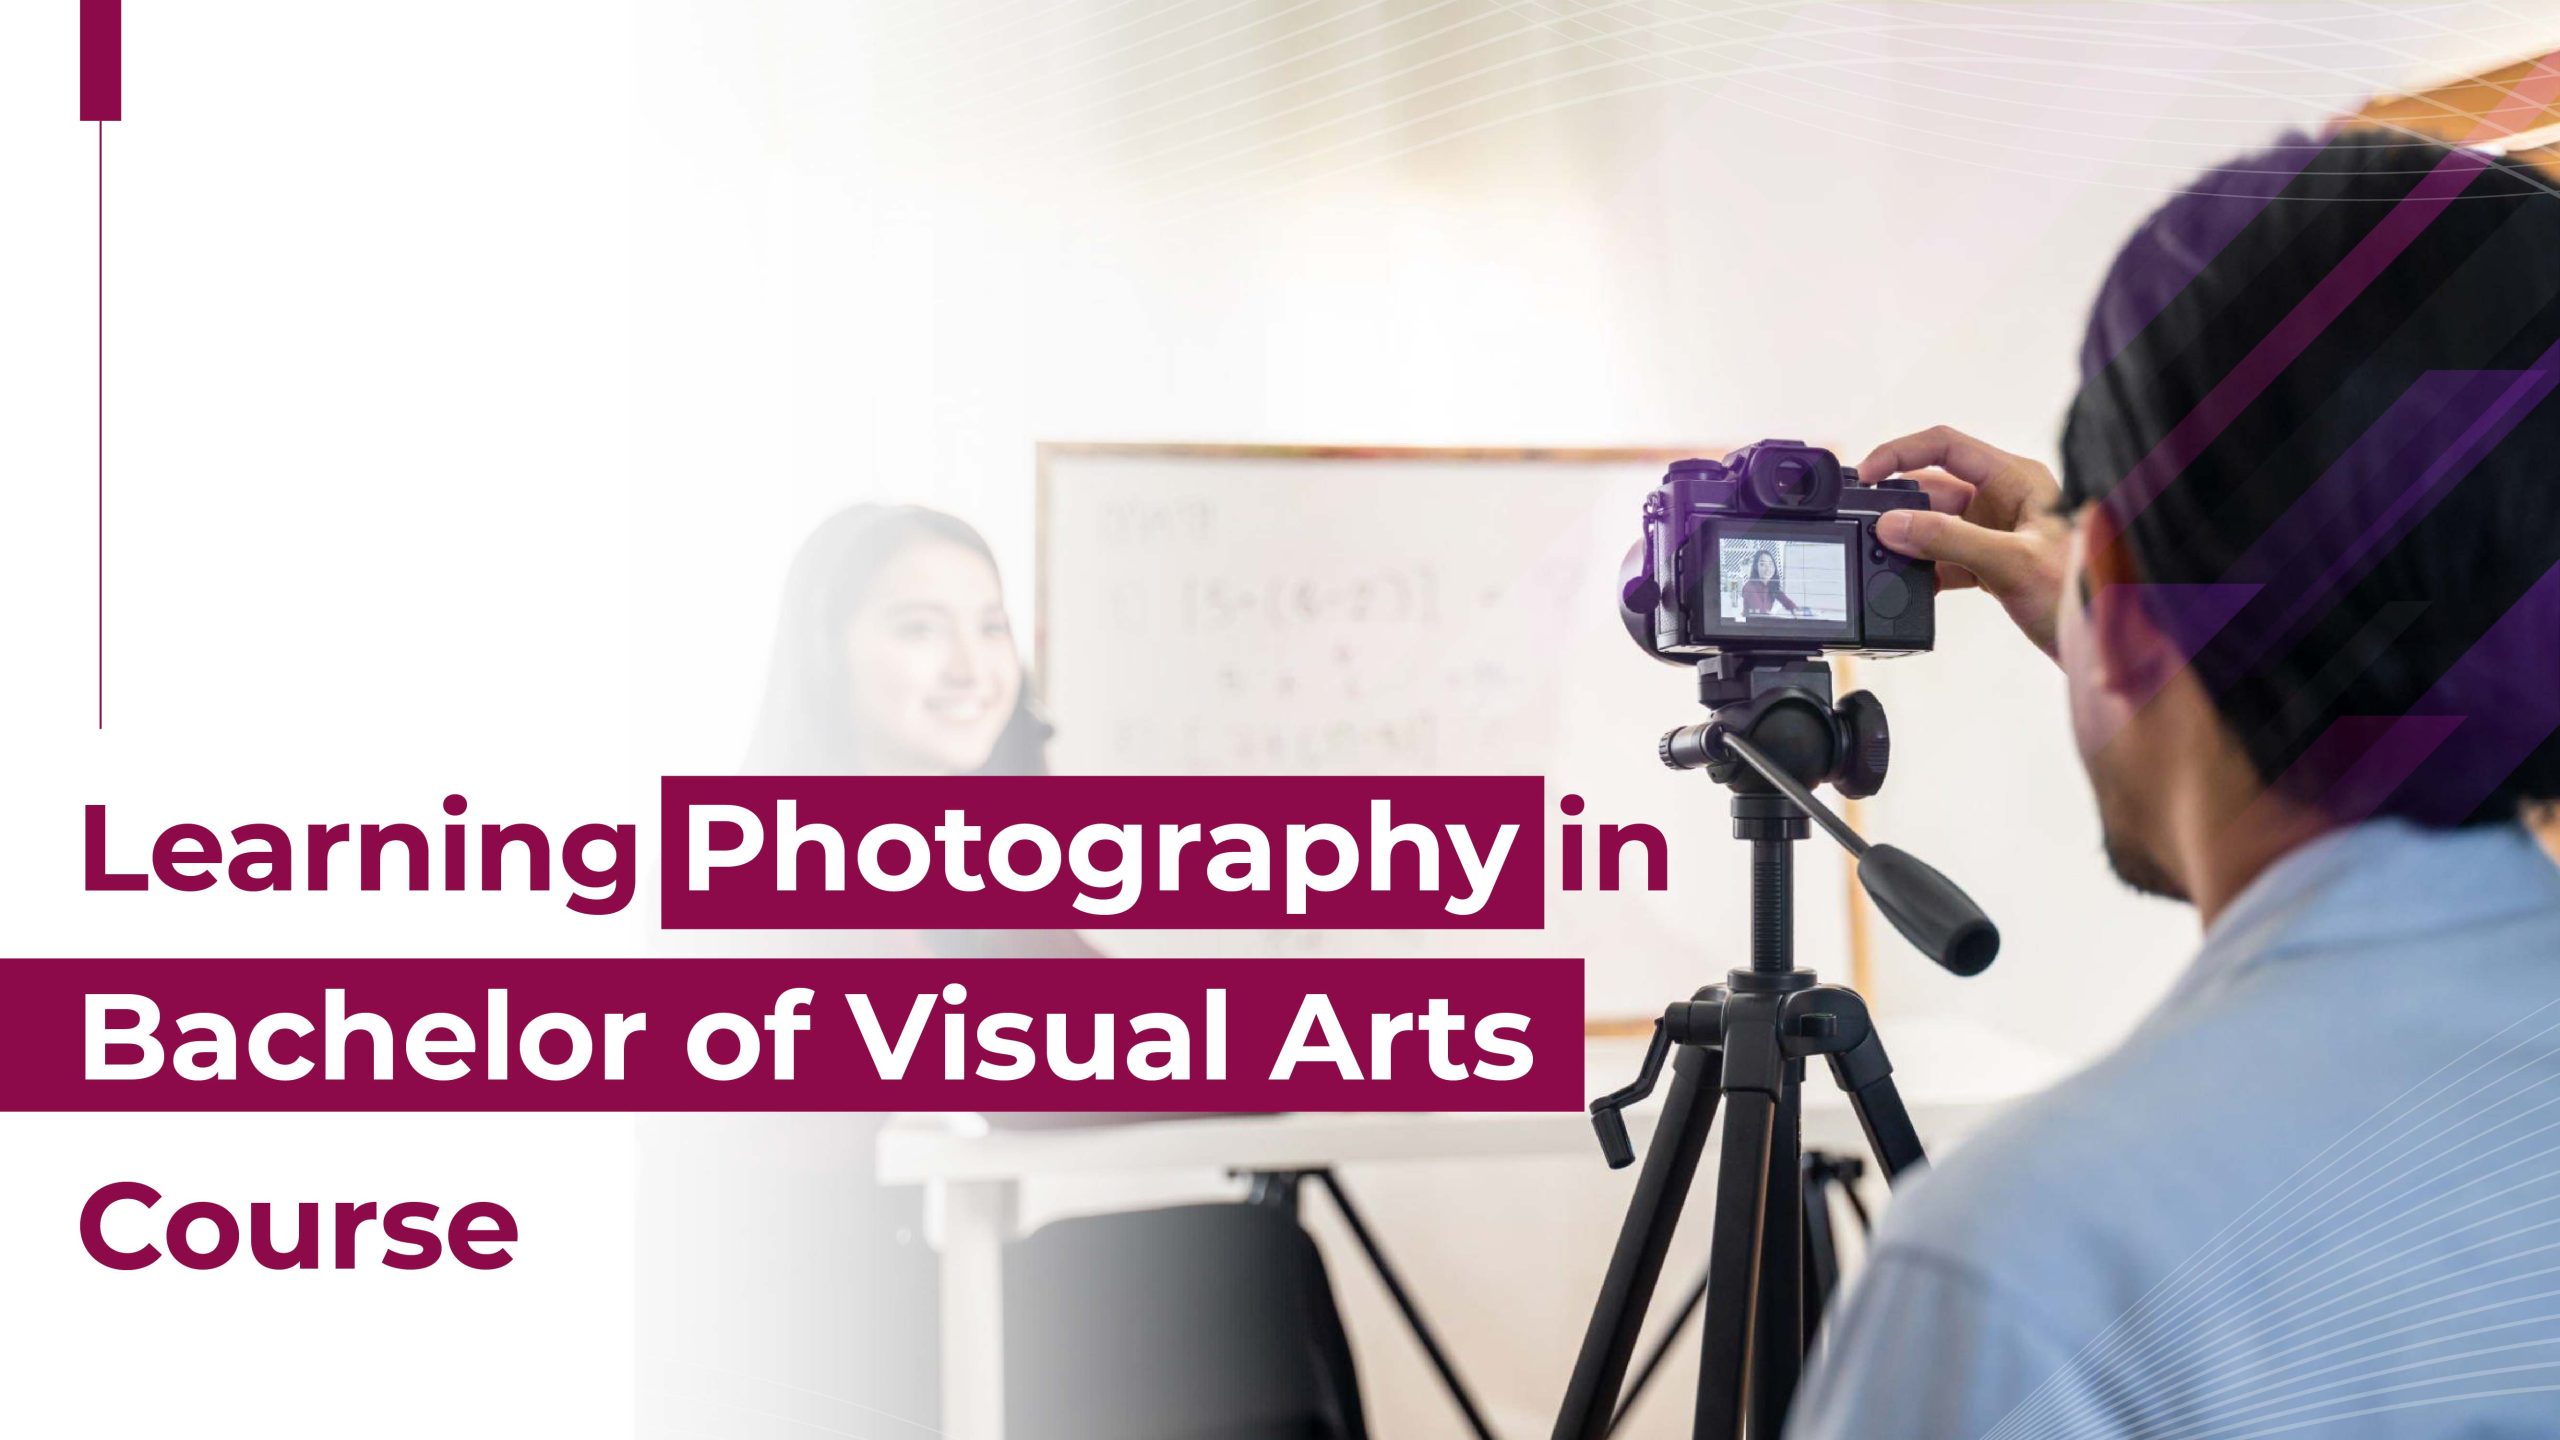 Learning Photography in Bachelor of Visual Arts Course  